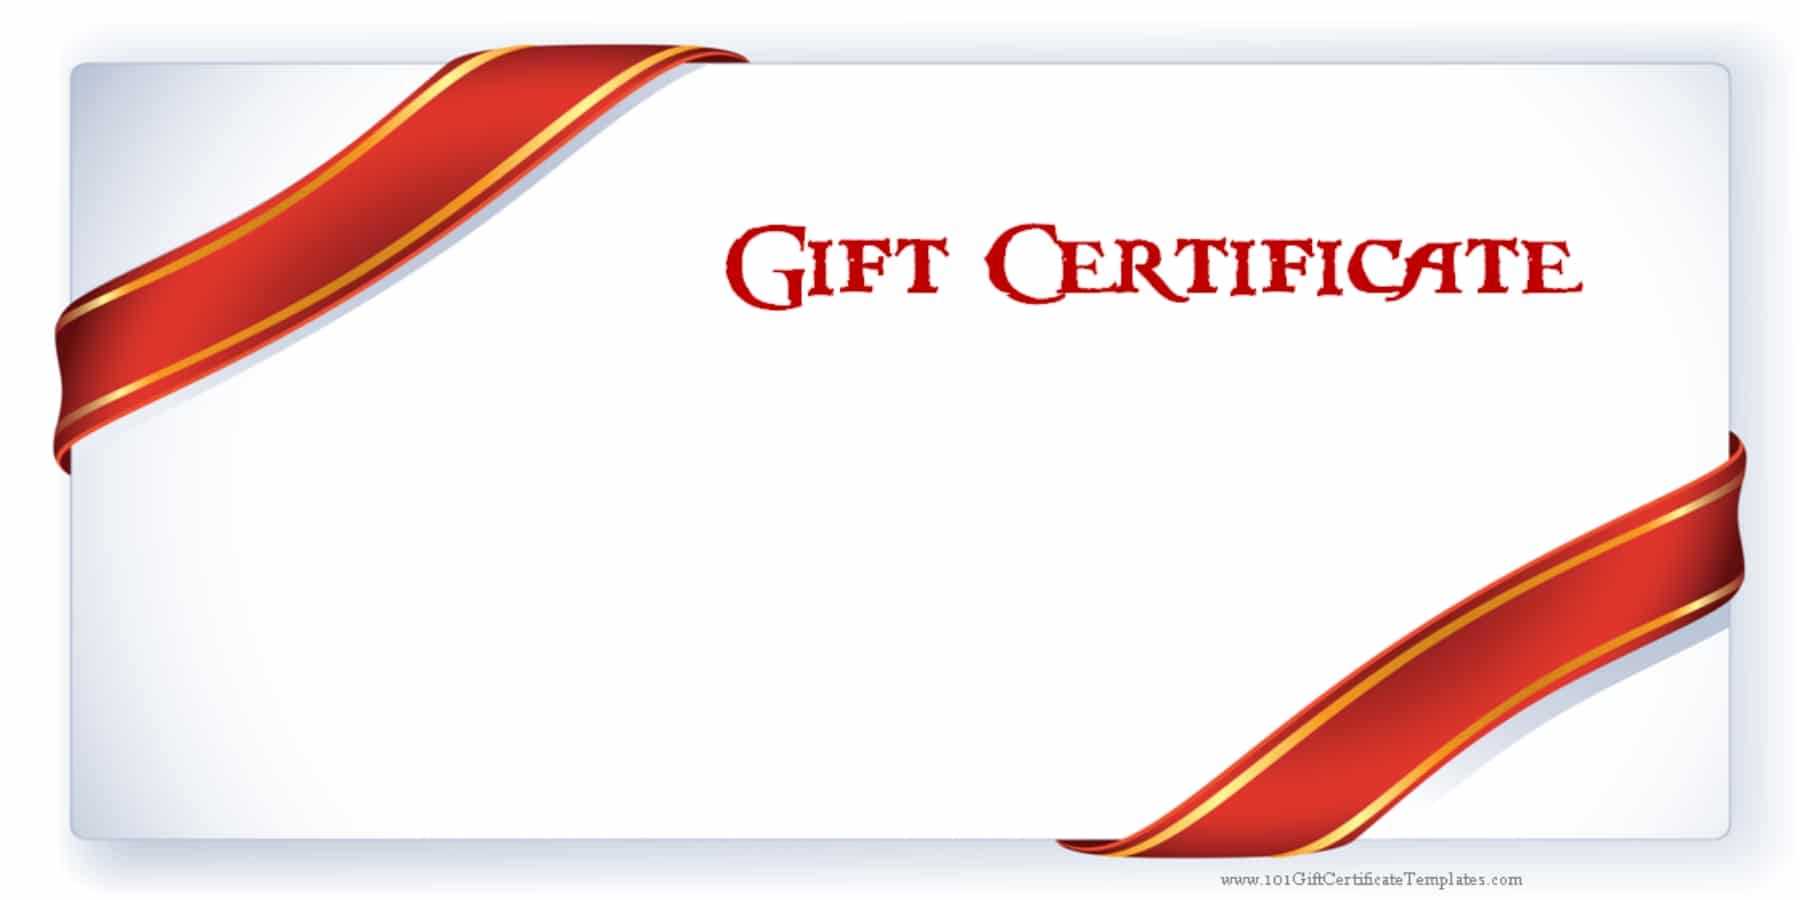 Printable Gift Certificate Templates Intended For Printable Gift Certificates Templates Free